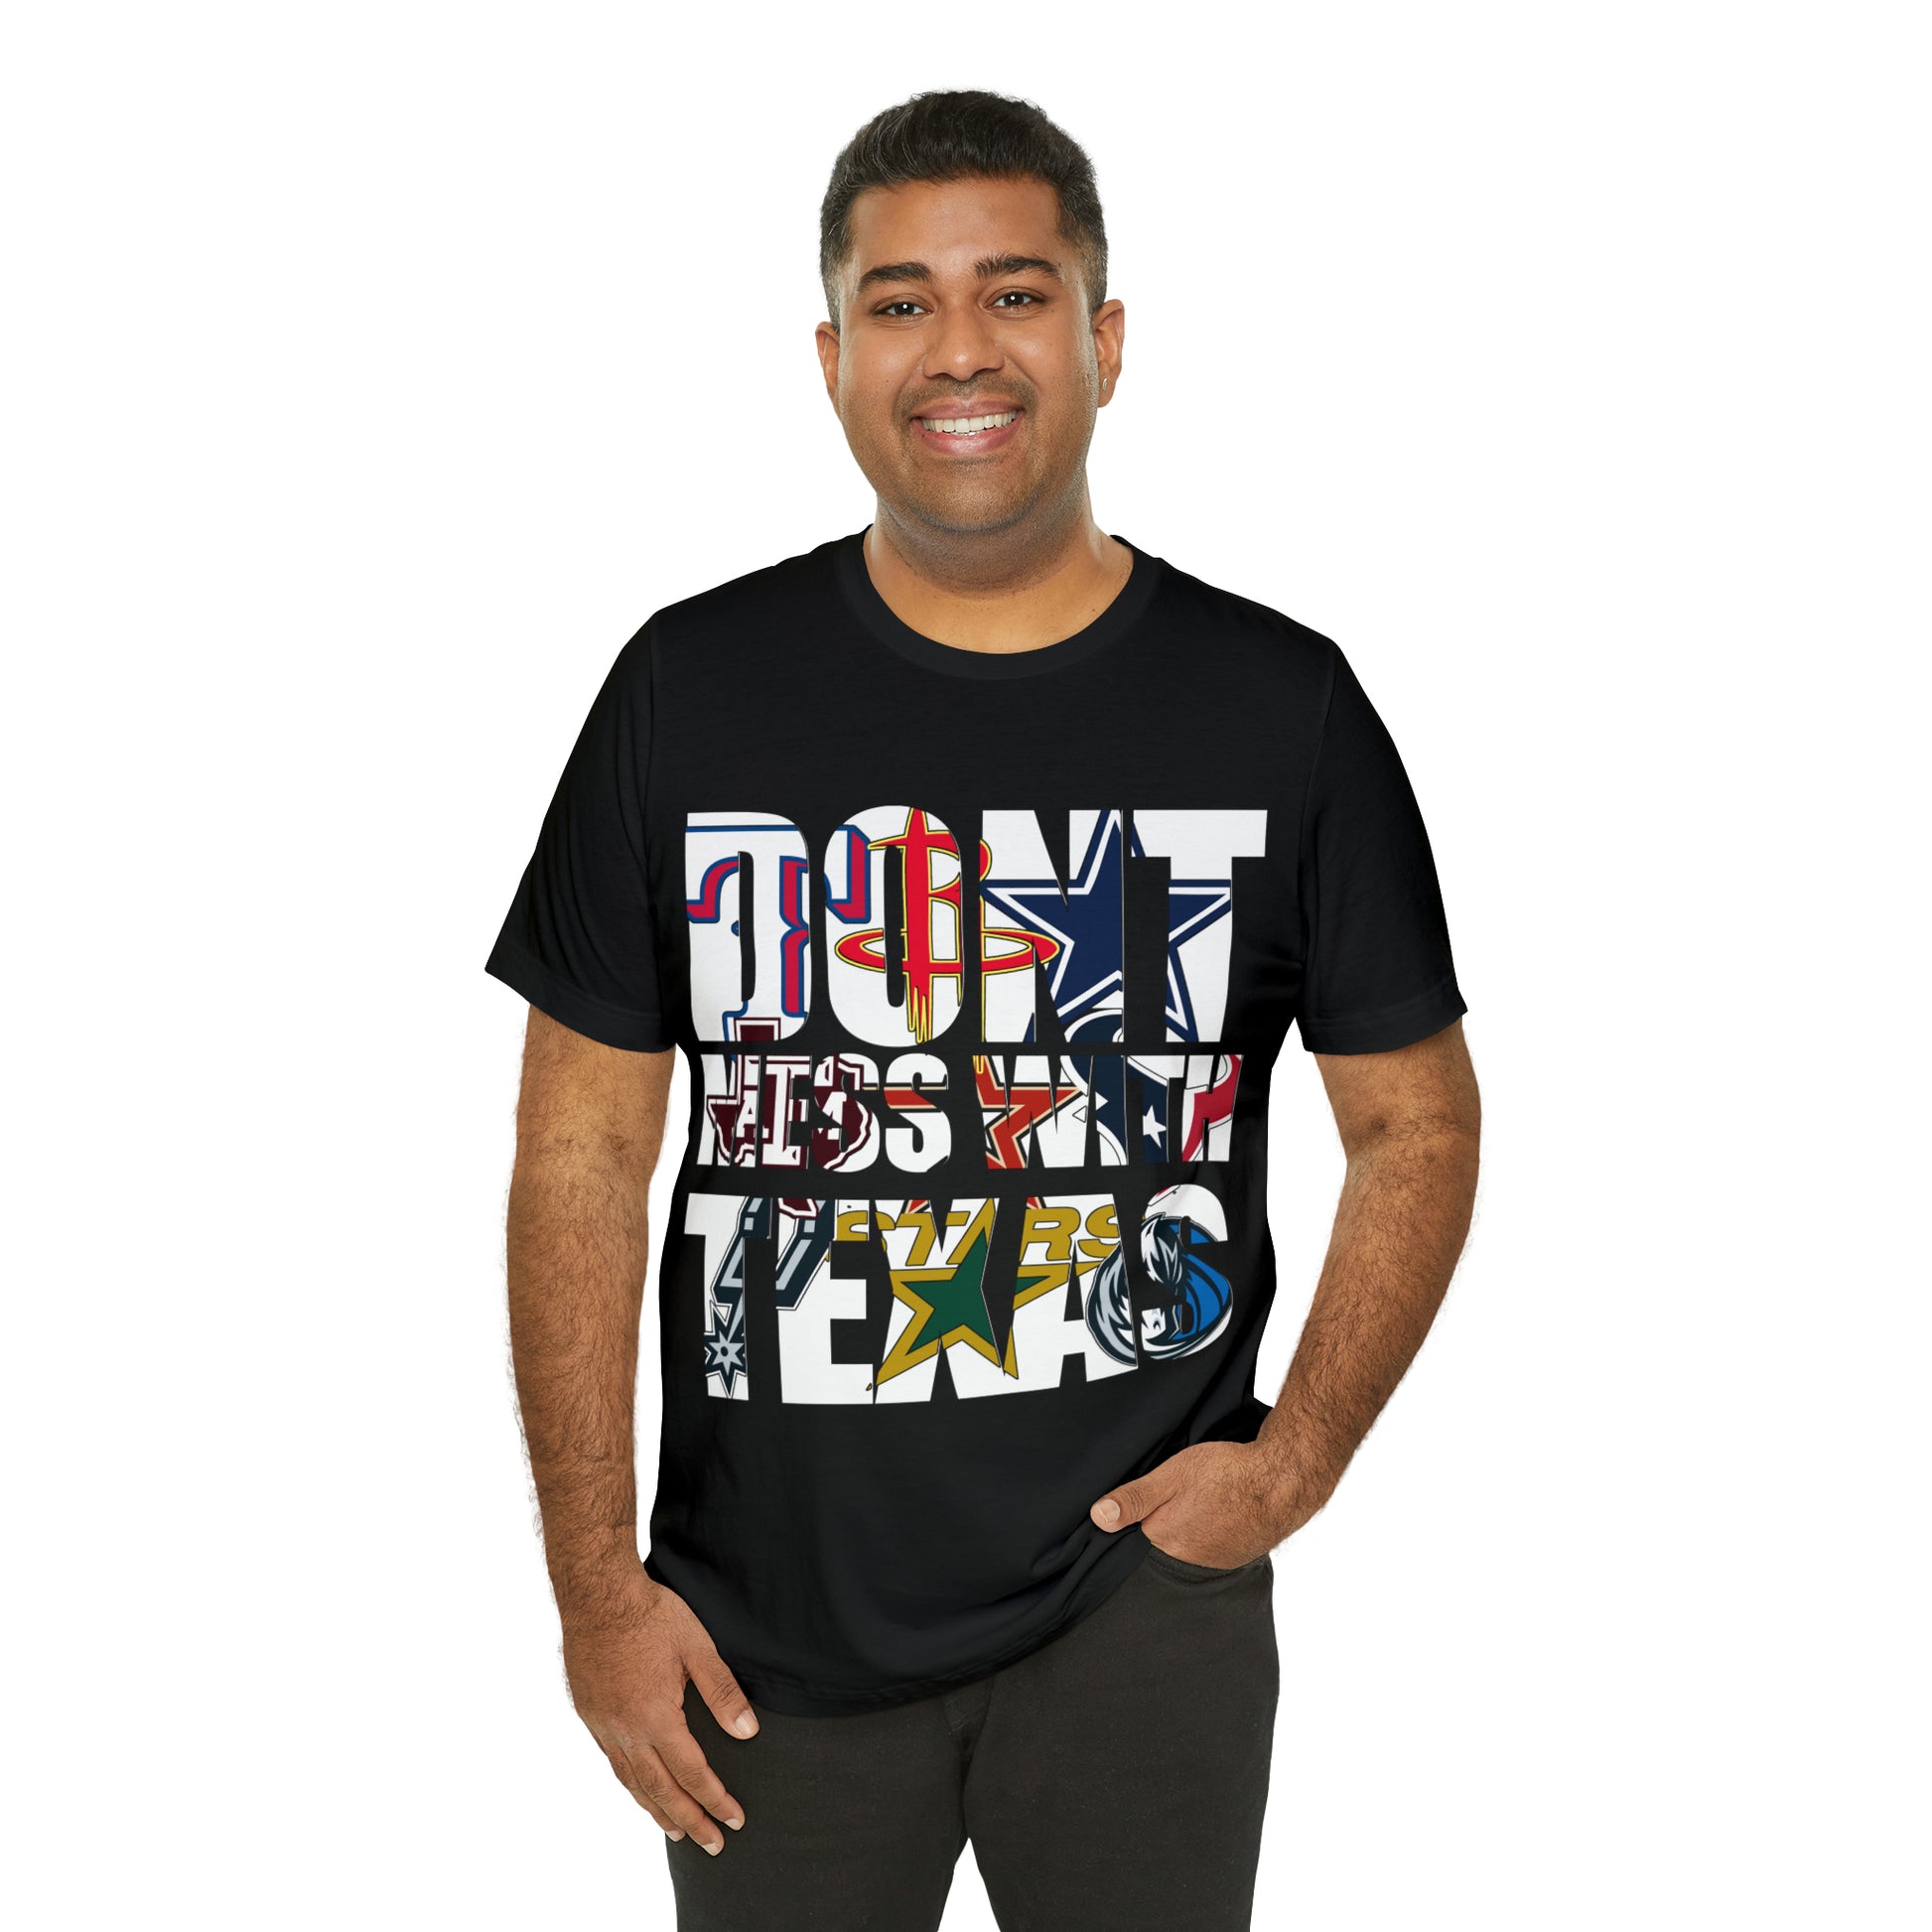 Texas Sports Mash-Up Tee - Don't Mess with Texas! - thenightmareinc